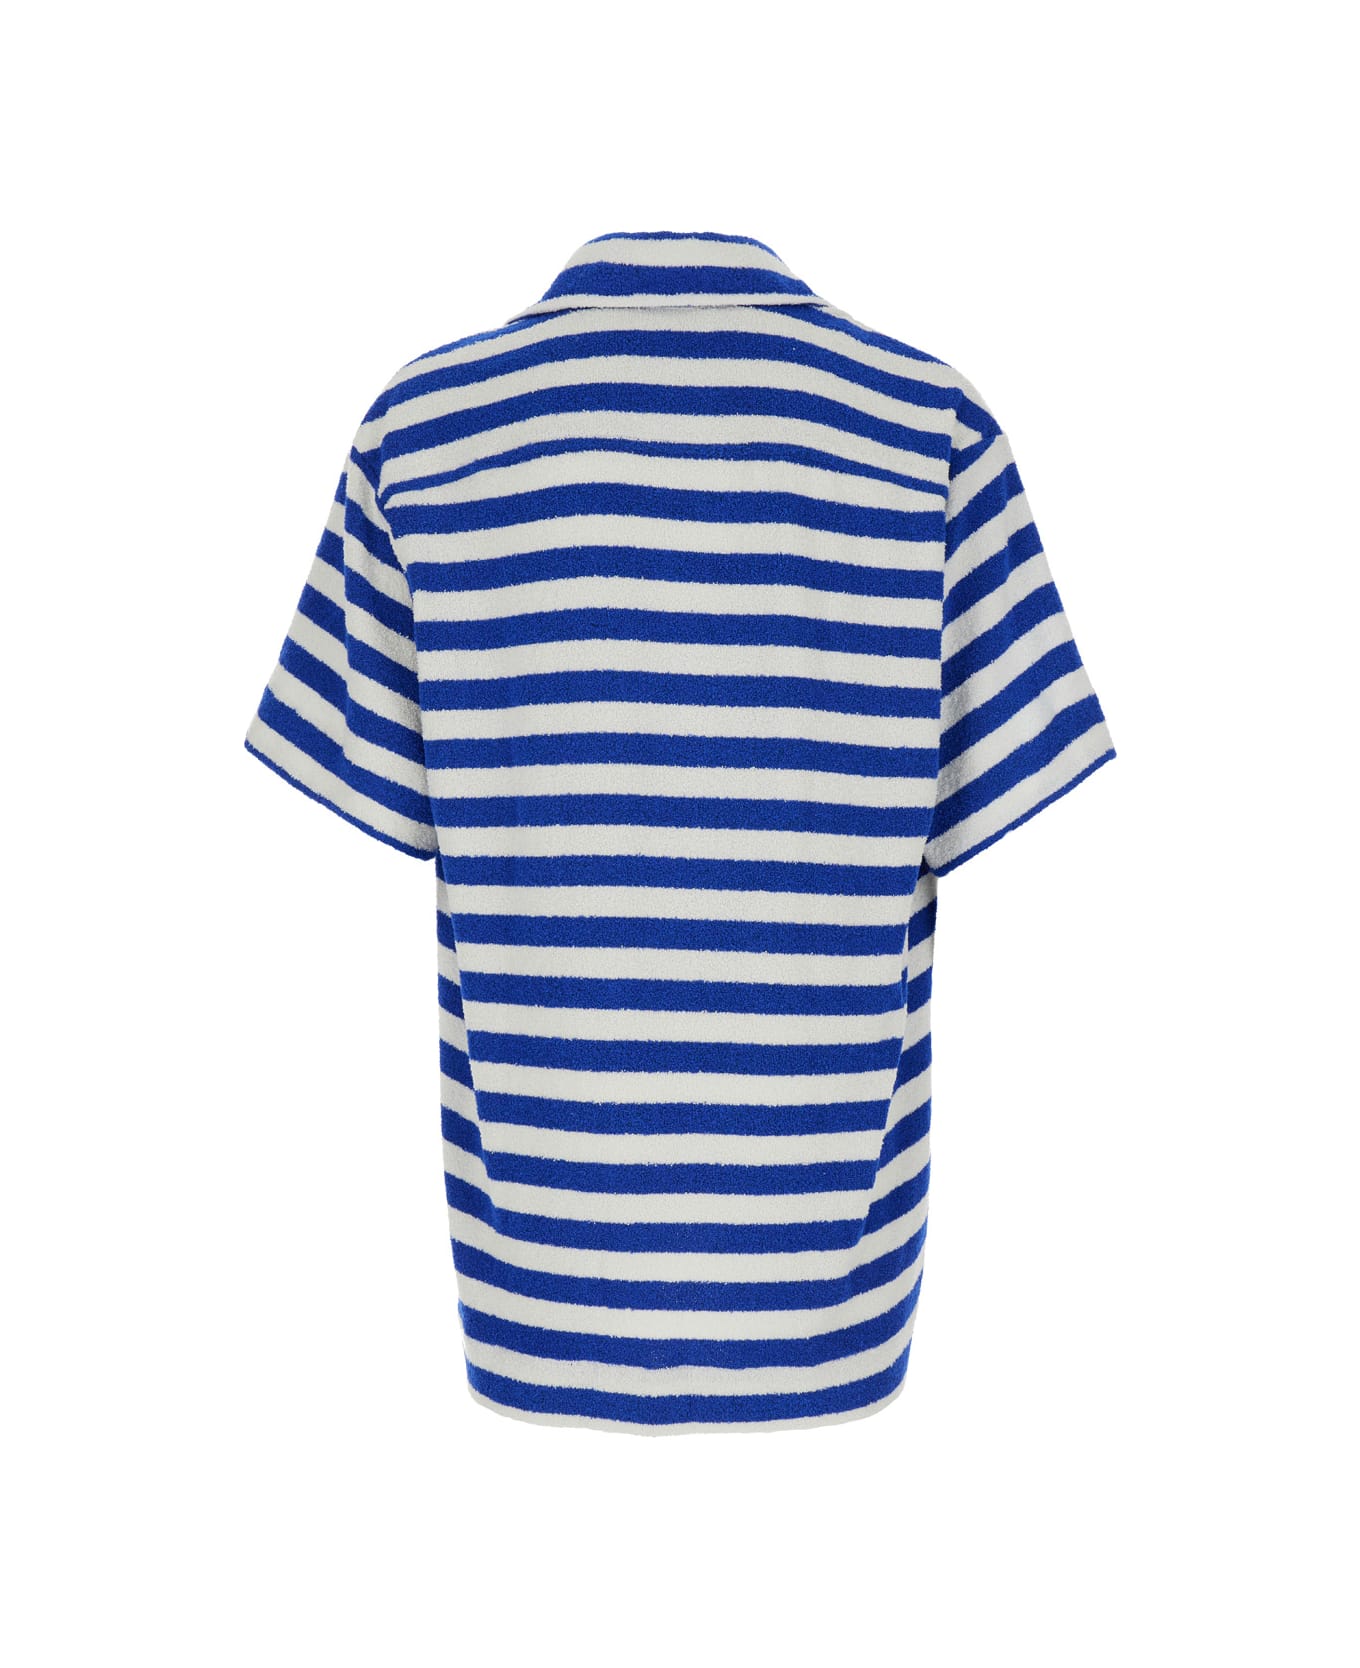 Vivienne Westwood Blue And White Striped Bowling Shirt With Orb Embroidery In Cotton Blend Man - Blu